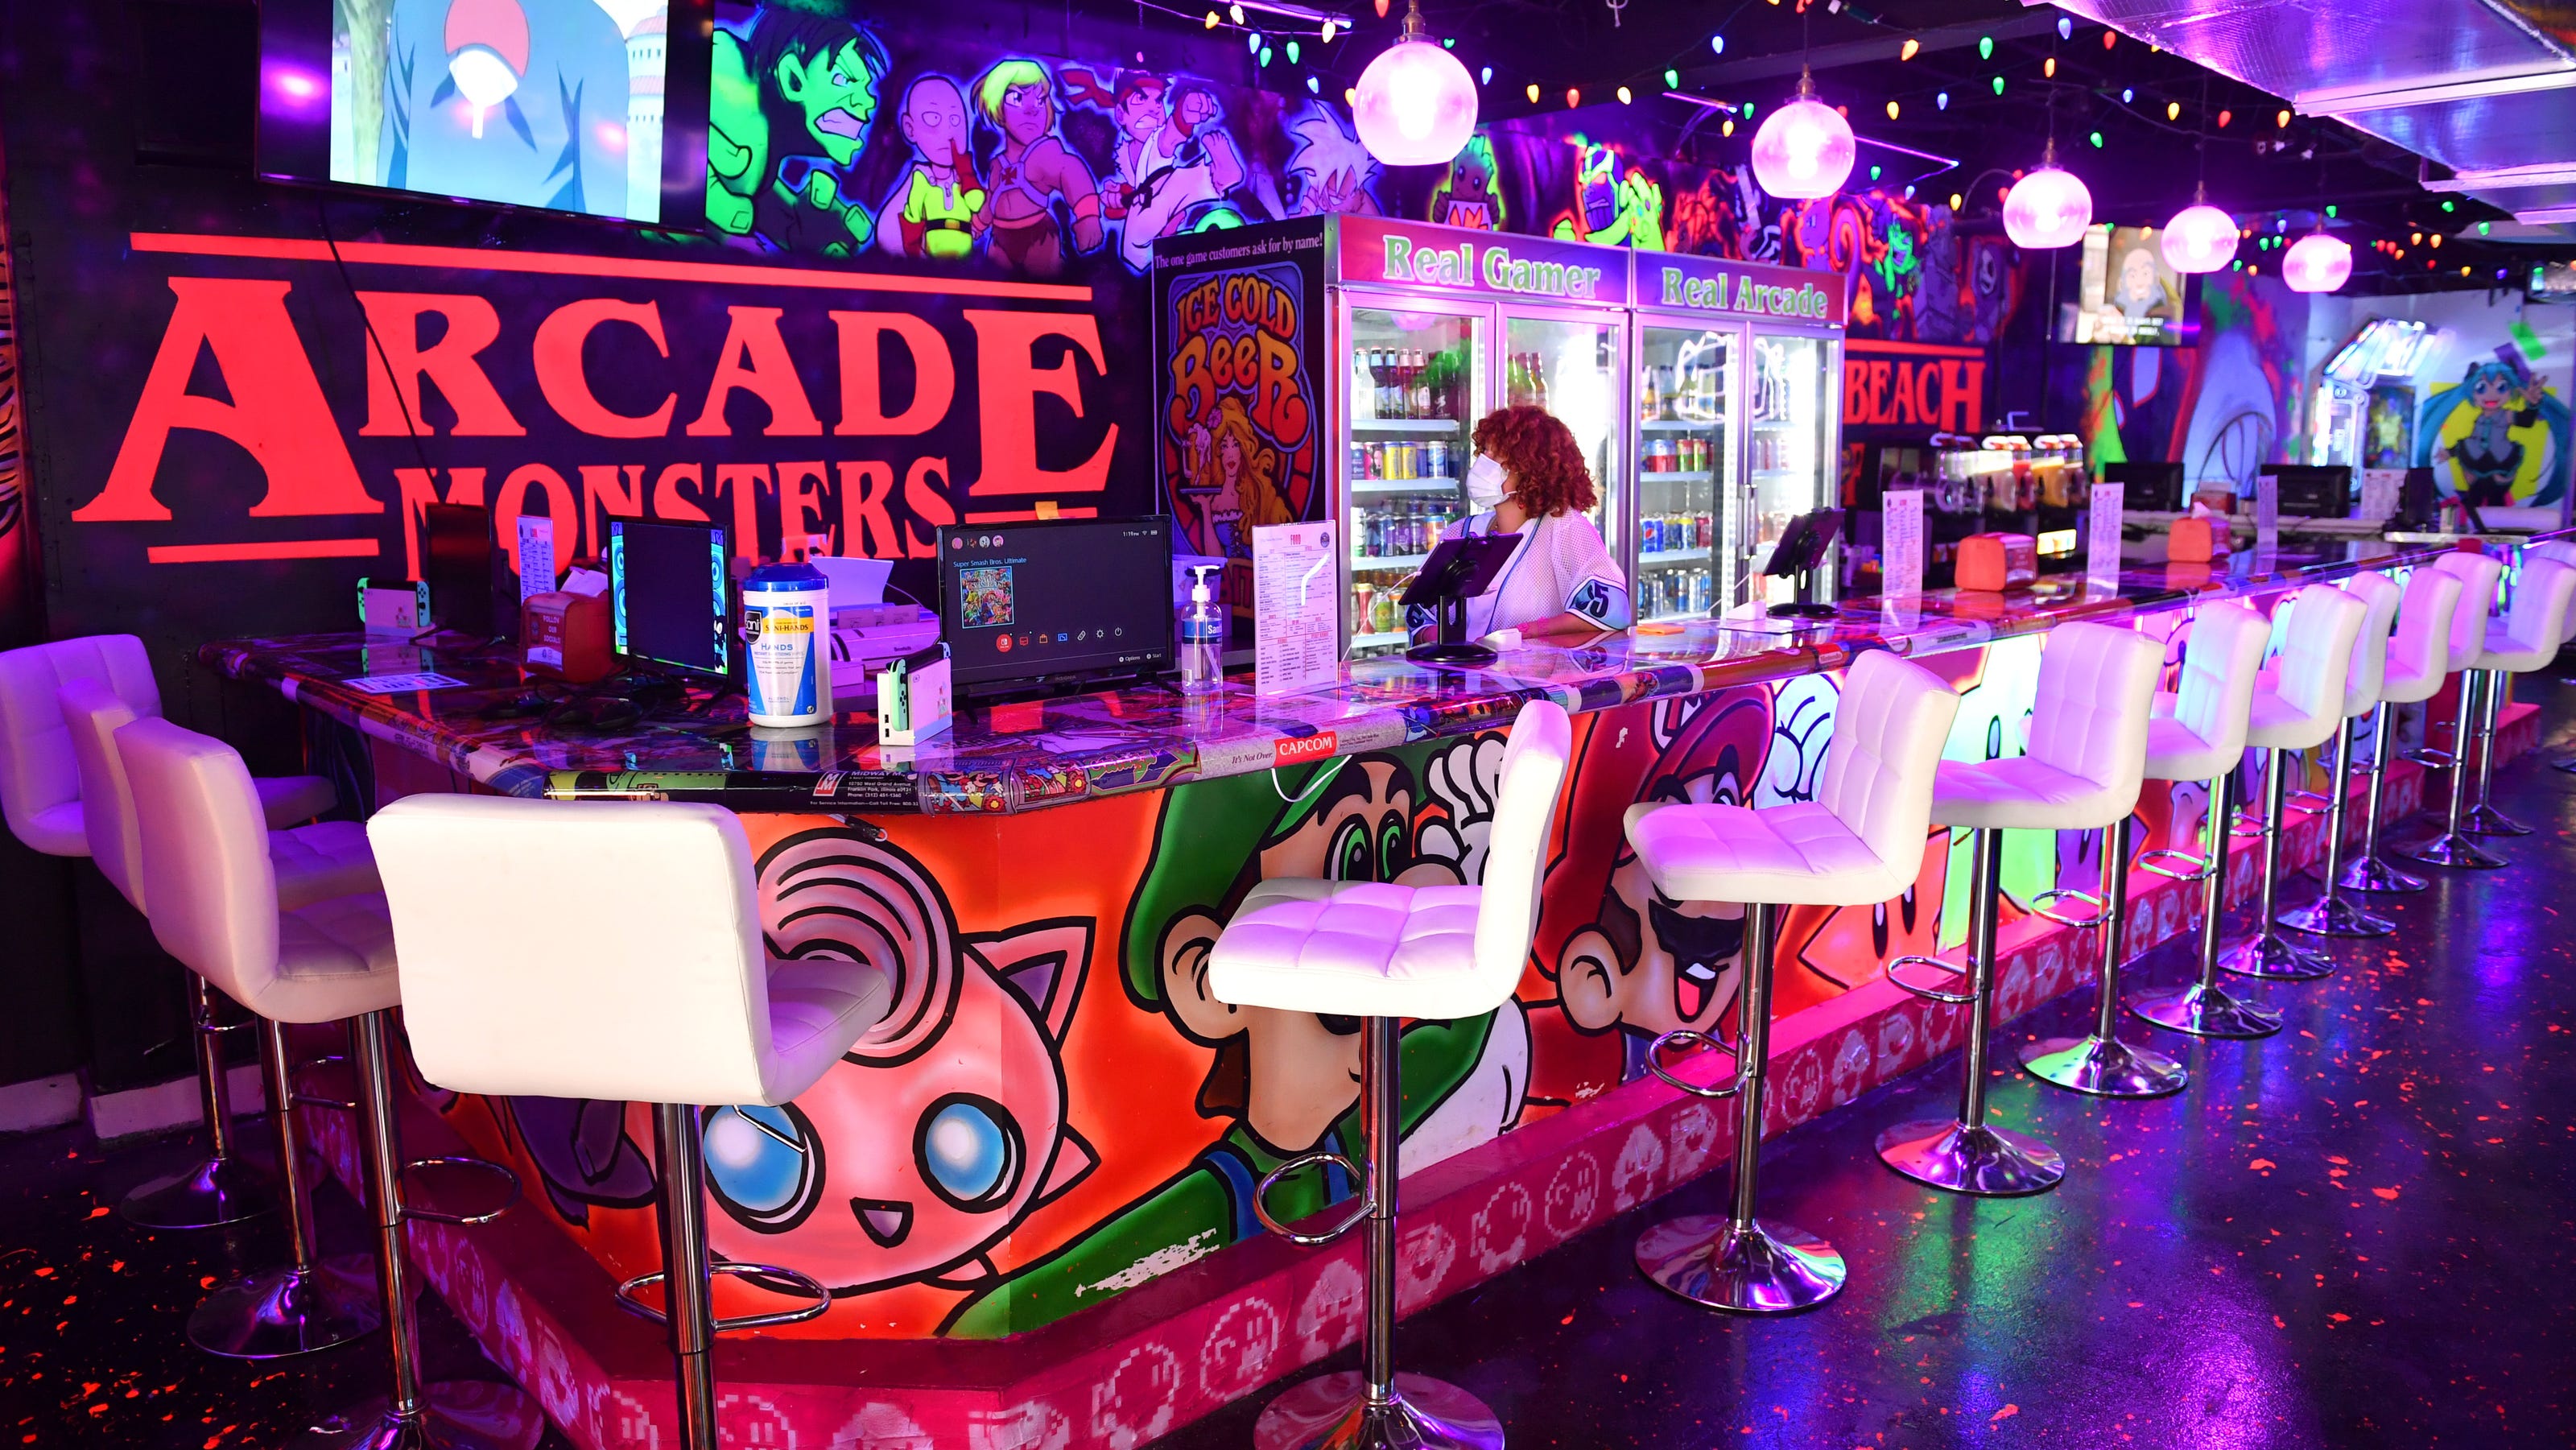 Arcade Monsters Offers Games Cuban Food And More In Sarasota